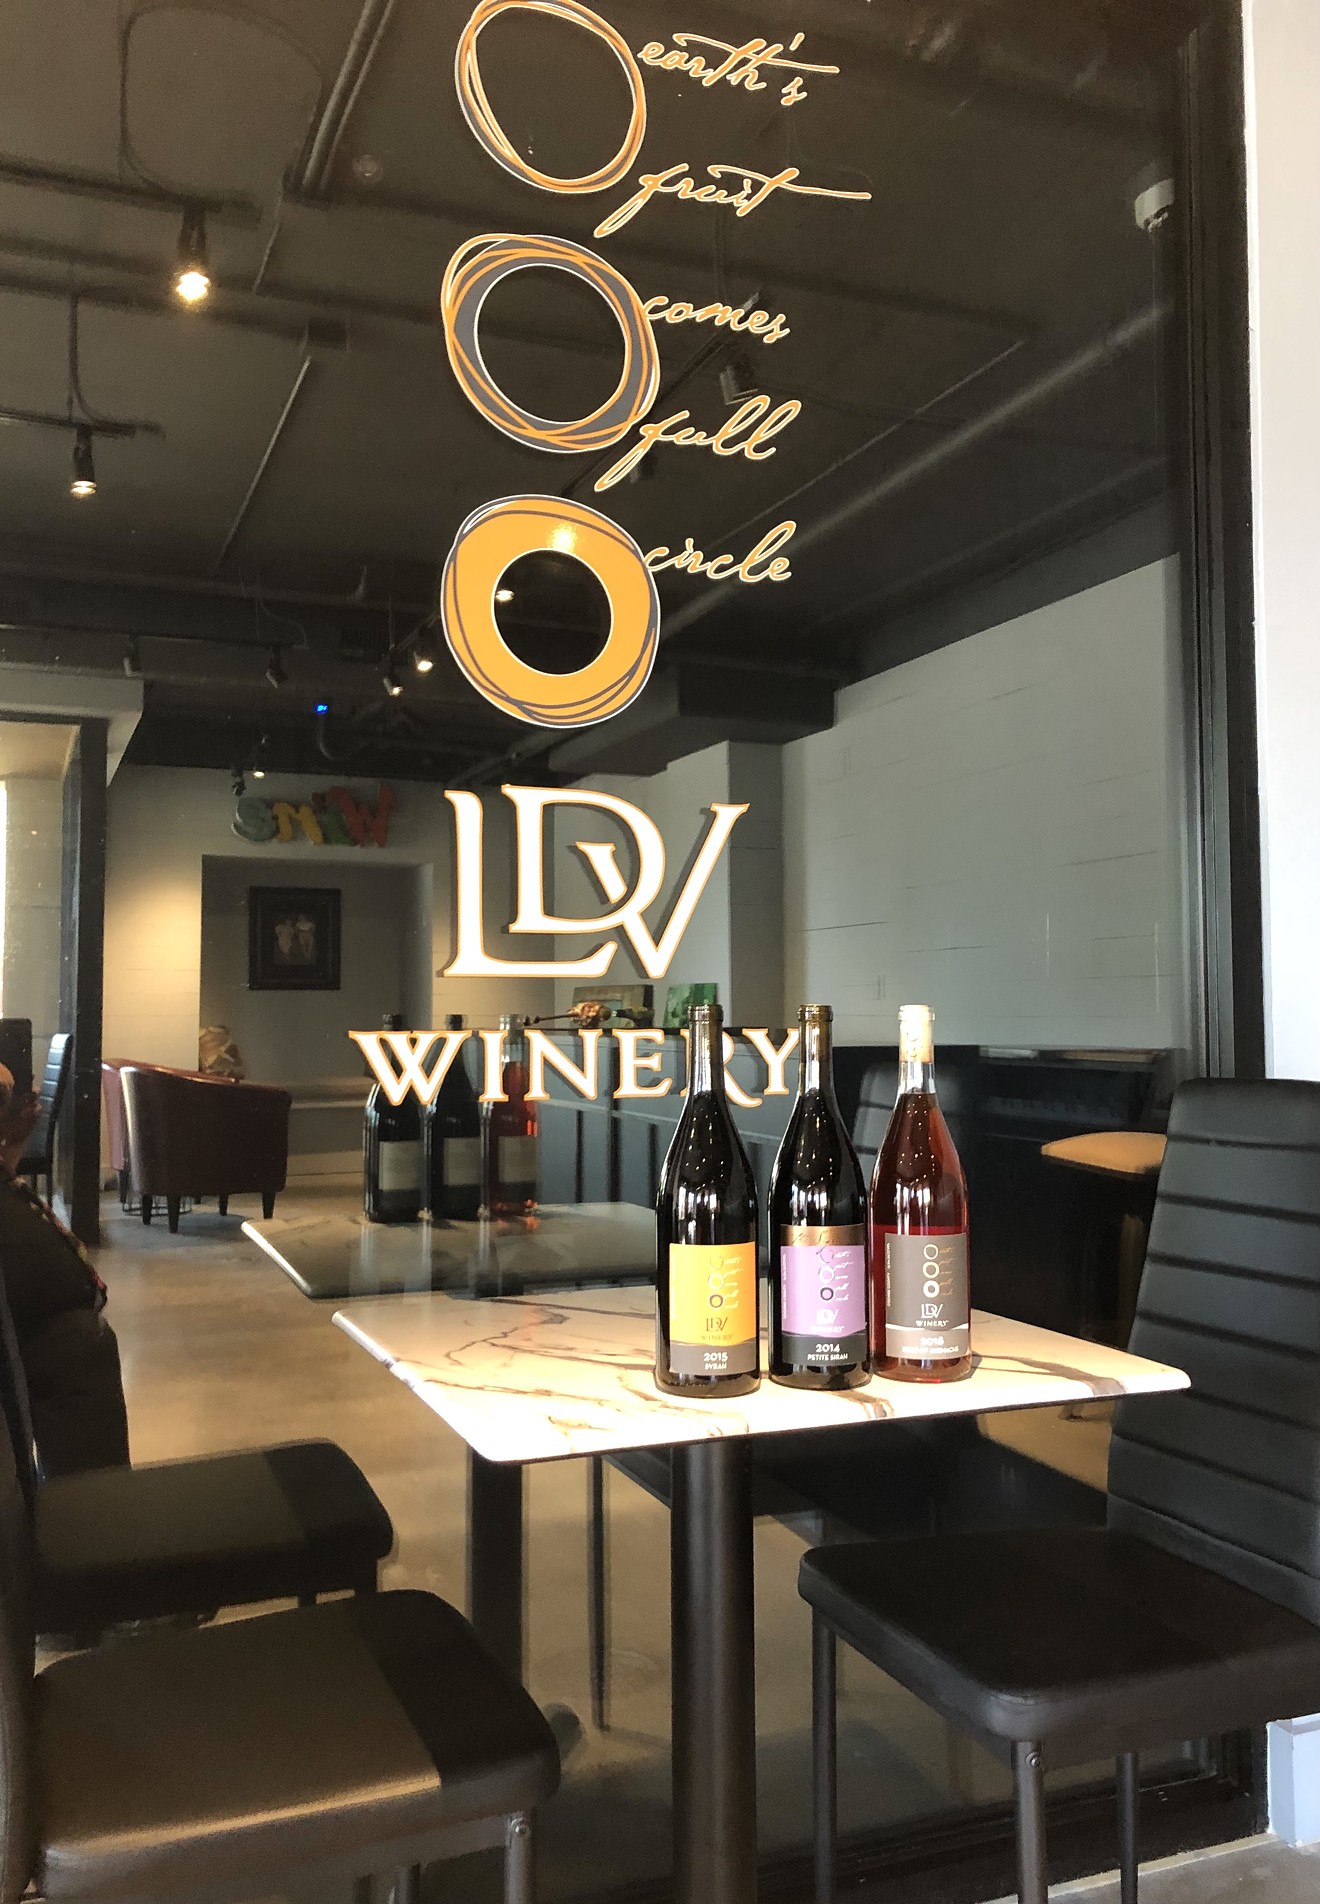 LDV Winery is celebrating its remodeled tasting room with a grand reopening.